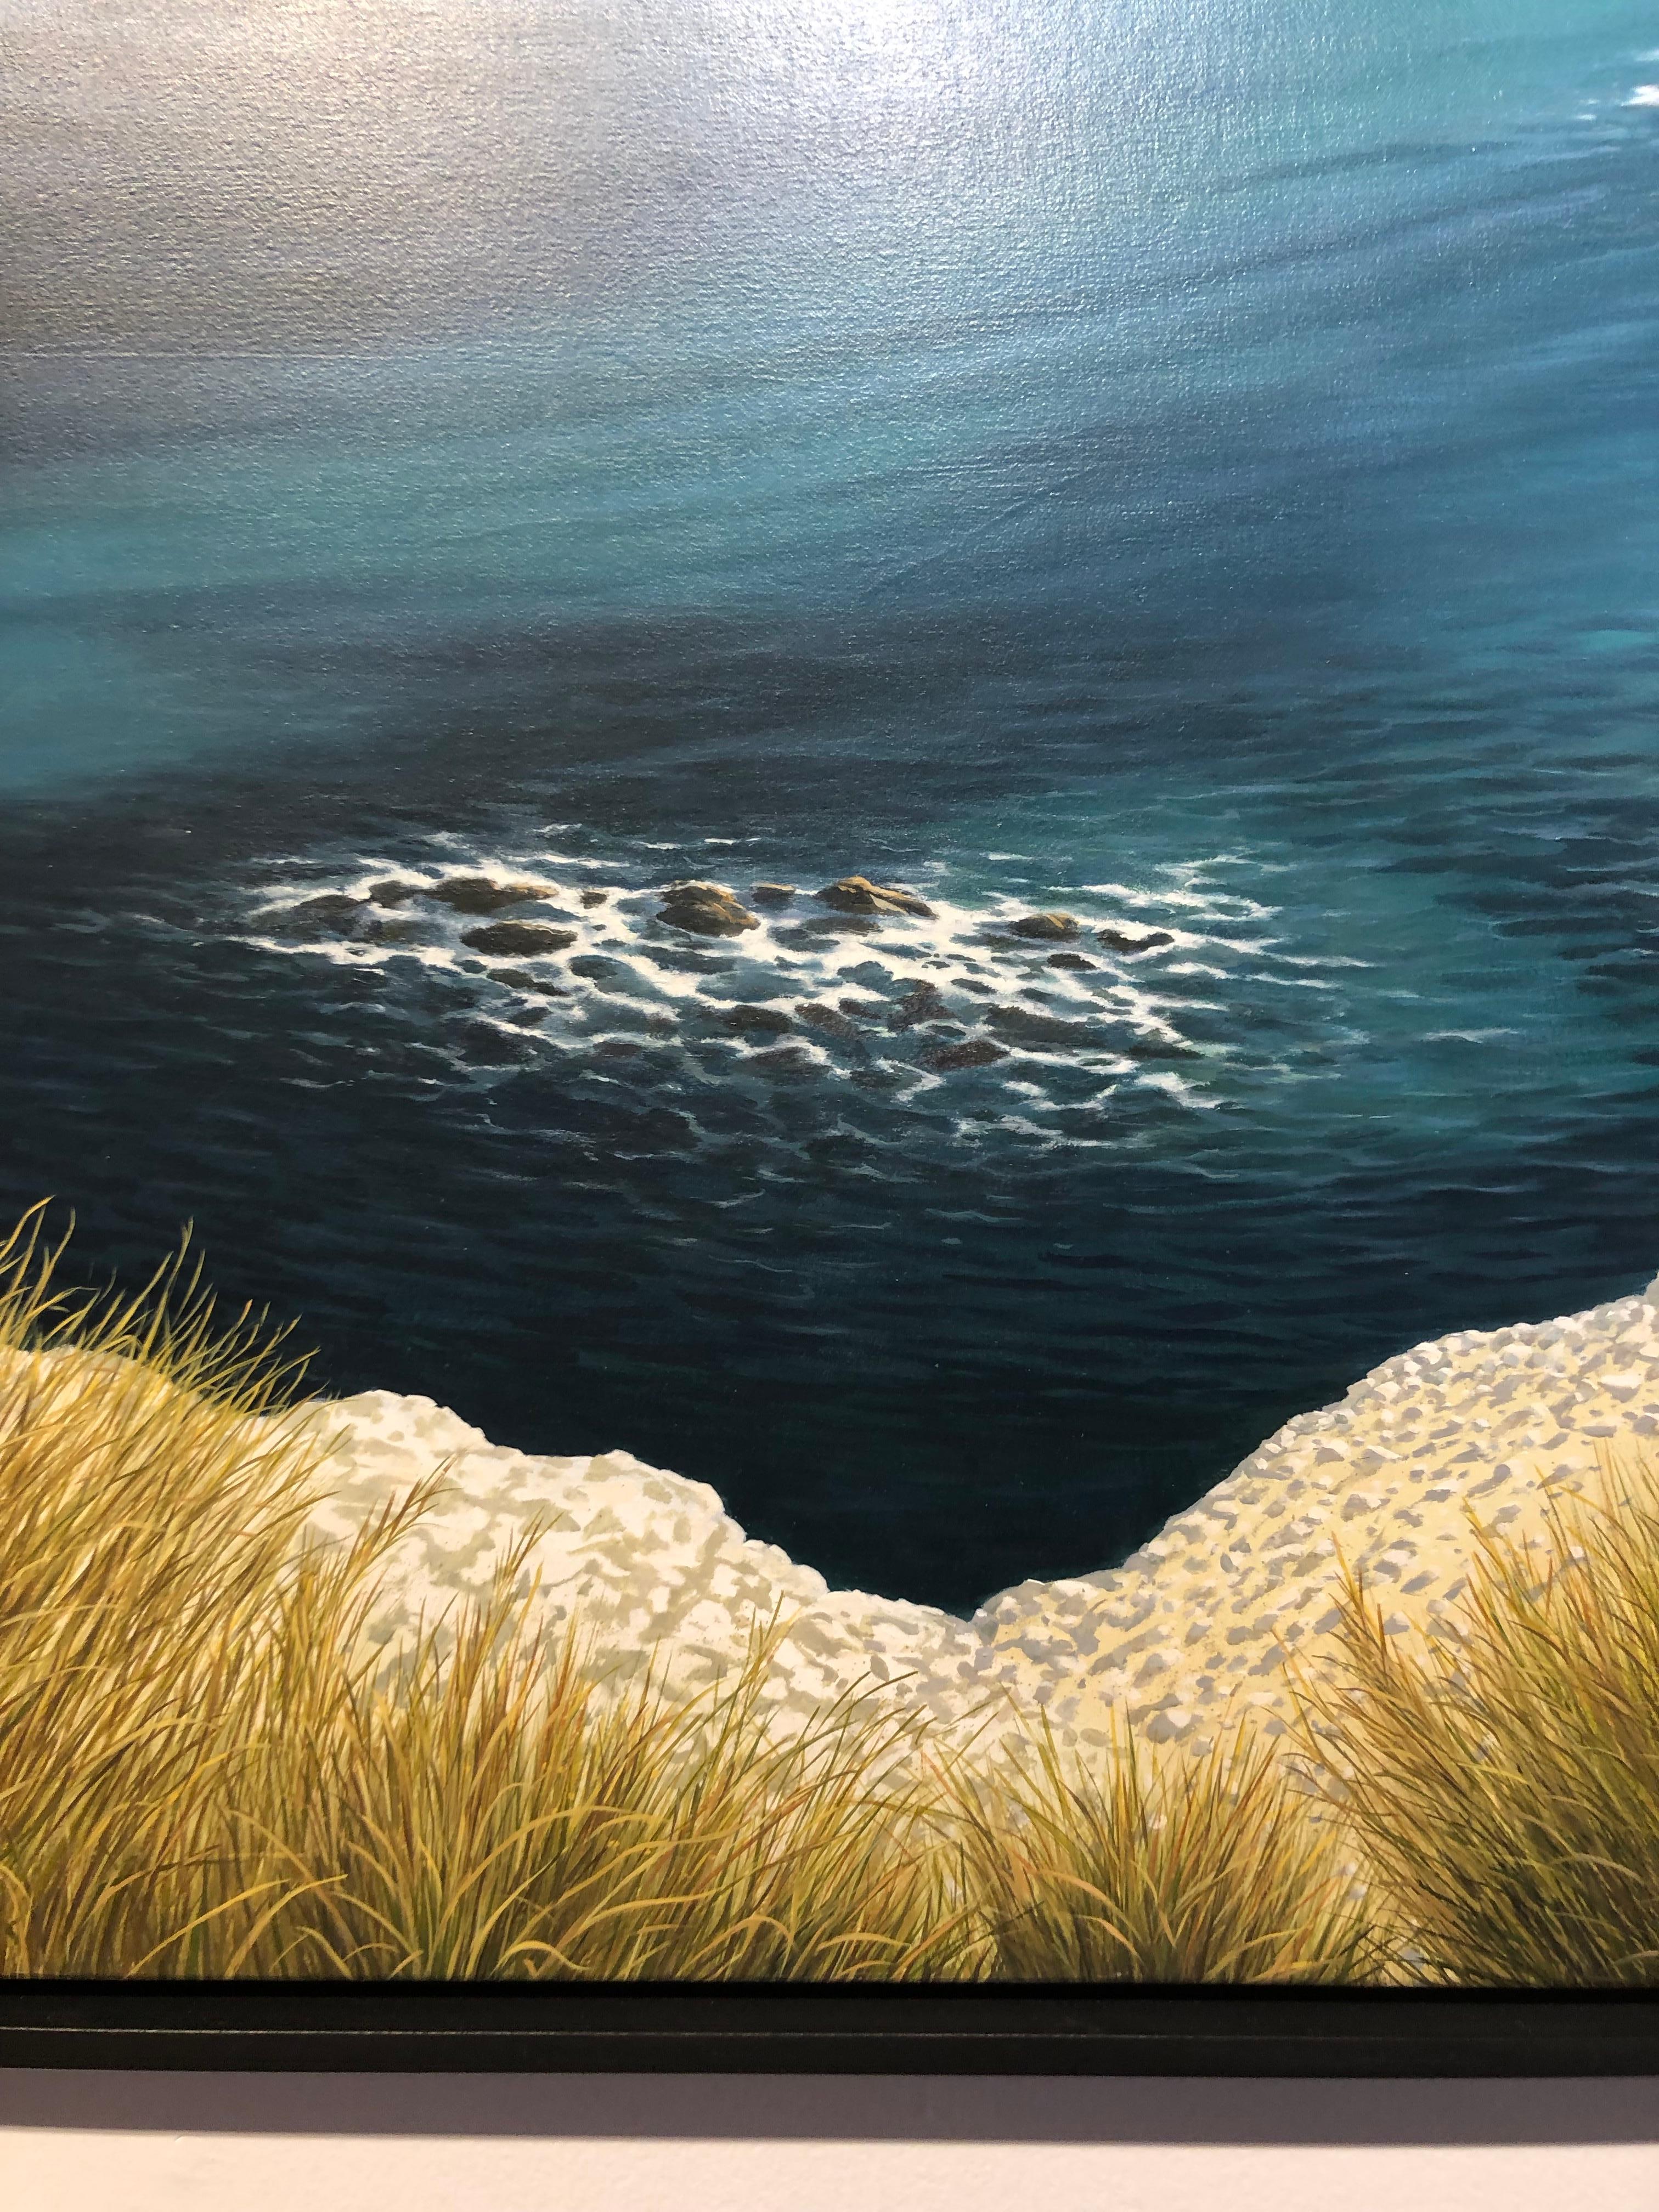 Evocation - Ocean Cliffside Scene Bathed in Warm Light and Blue Turquoise Water 4